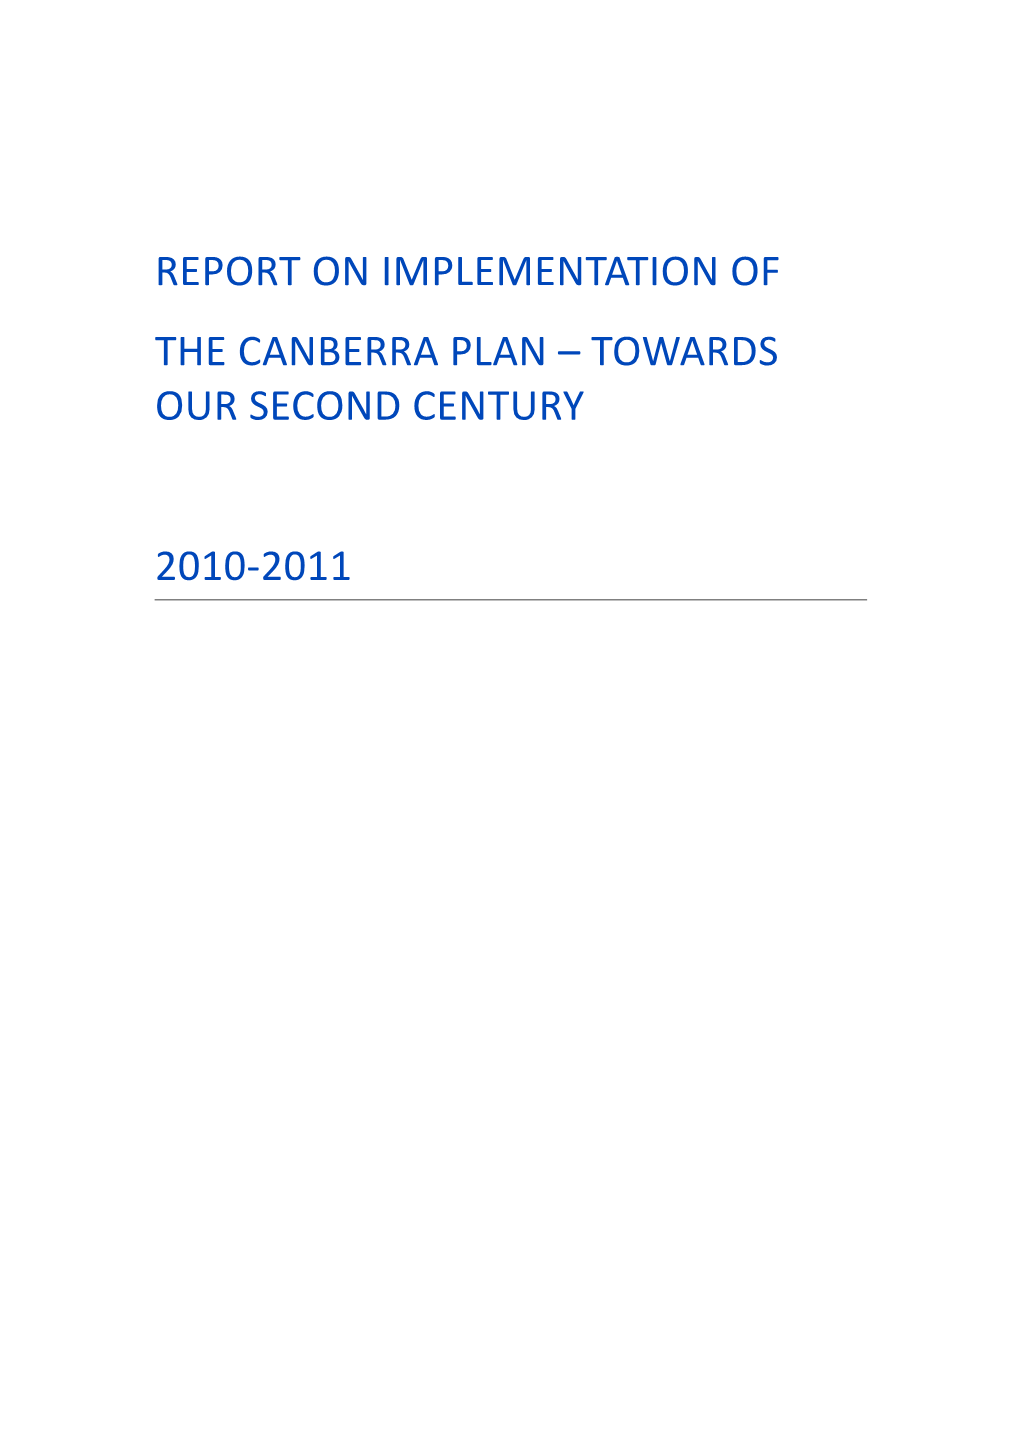 2010-2011 Annual Report on Implementation of the Canberra Plan - Towards Our Second Century